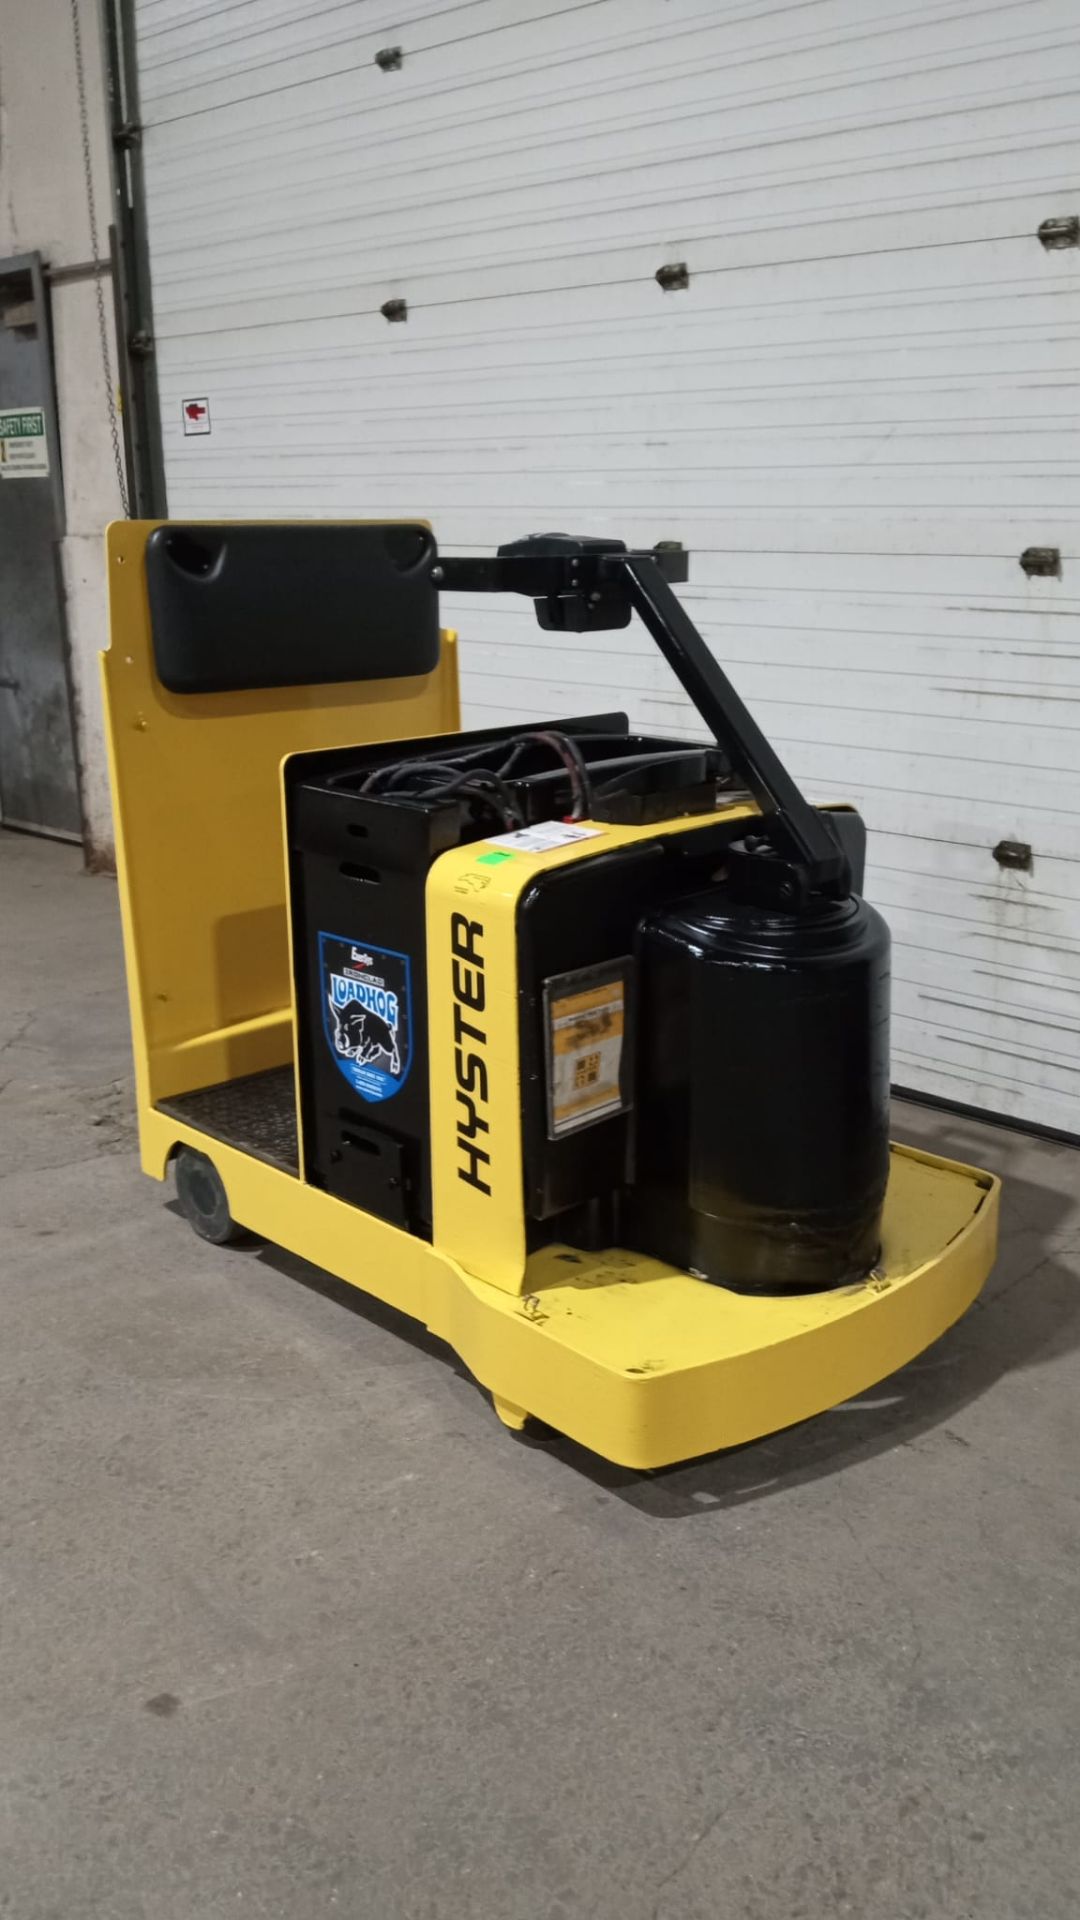 2018 Hyster Ride On Tow Tractor - Tugger / Personal Carrier with 24V Battery Electric Unit - Image 3 of 5